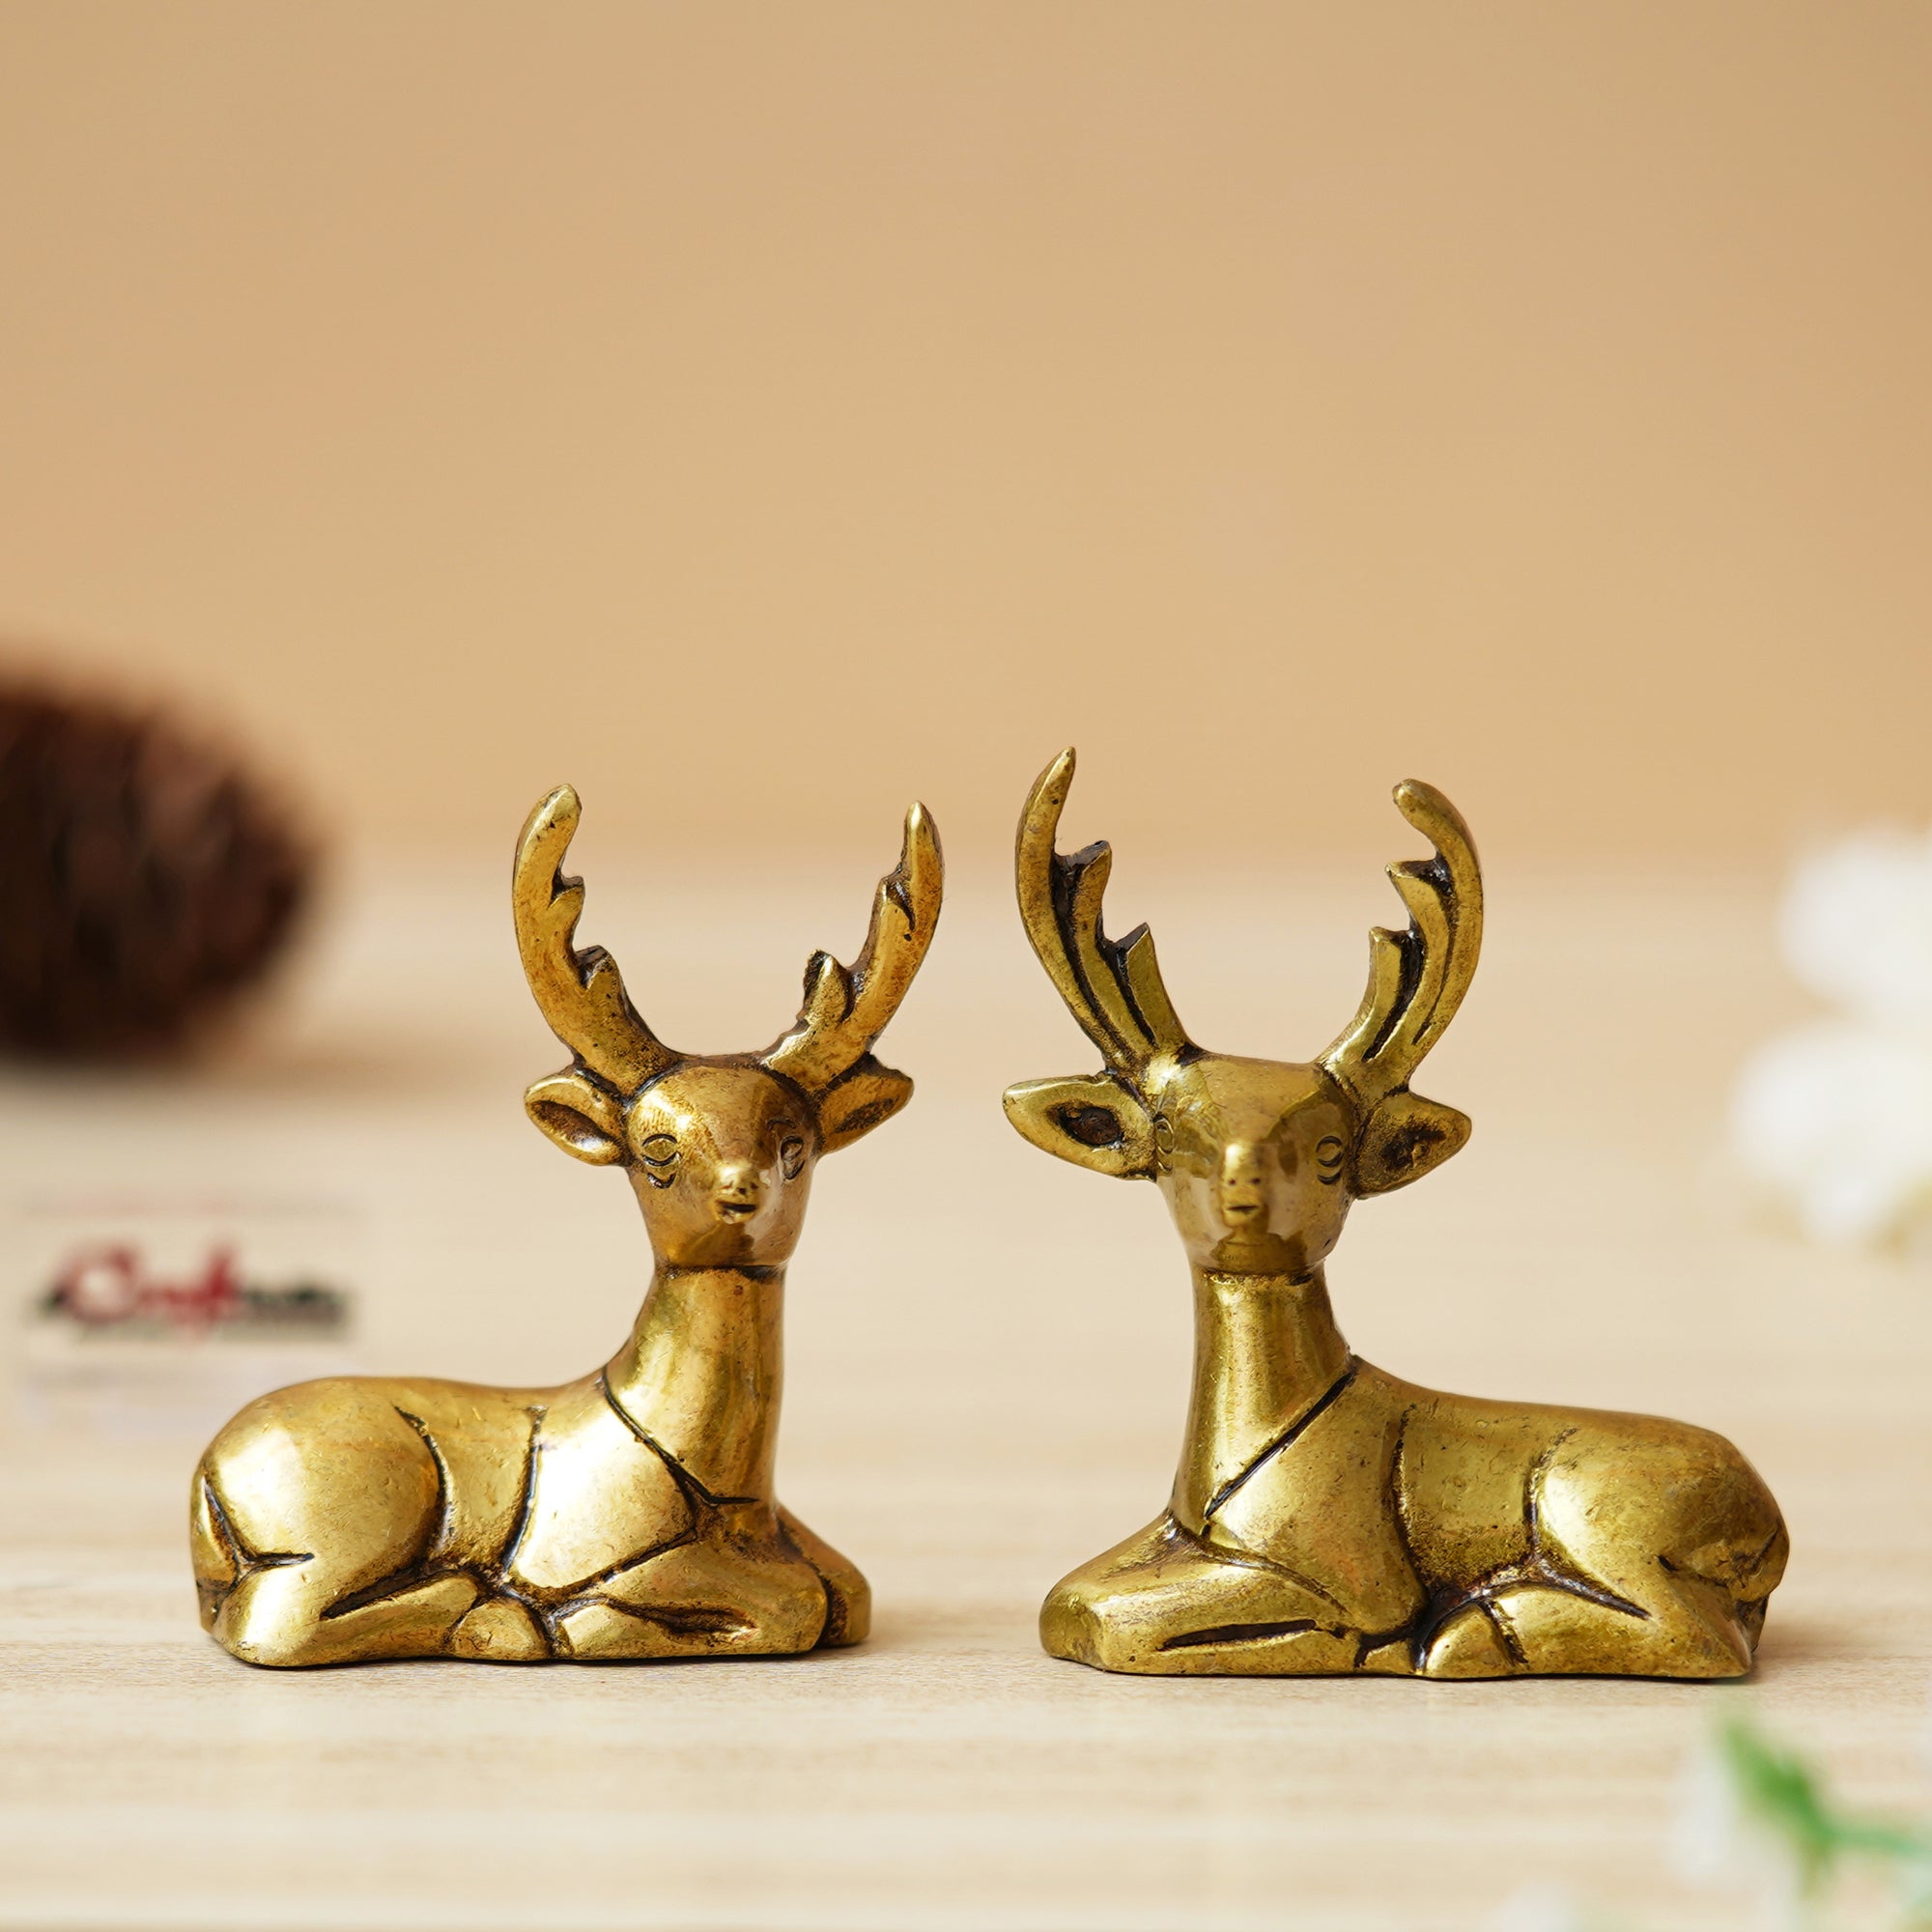 Set of 2 Golden Brass Deer Statues Showpieces - Animal Figurines for Home Decoration - Gift for Christmas, Winter Festivities, and Holiday Celebrations